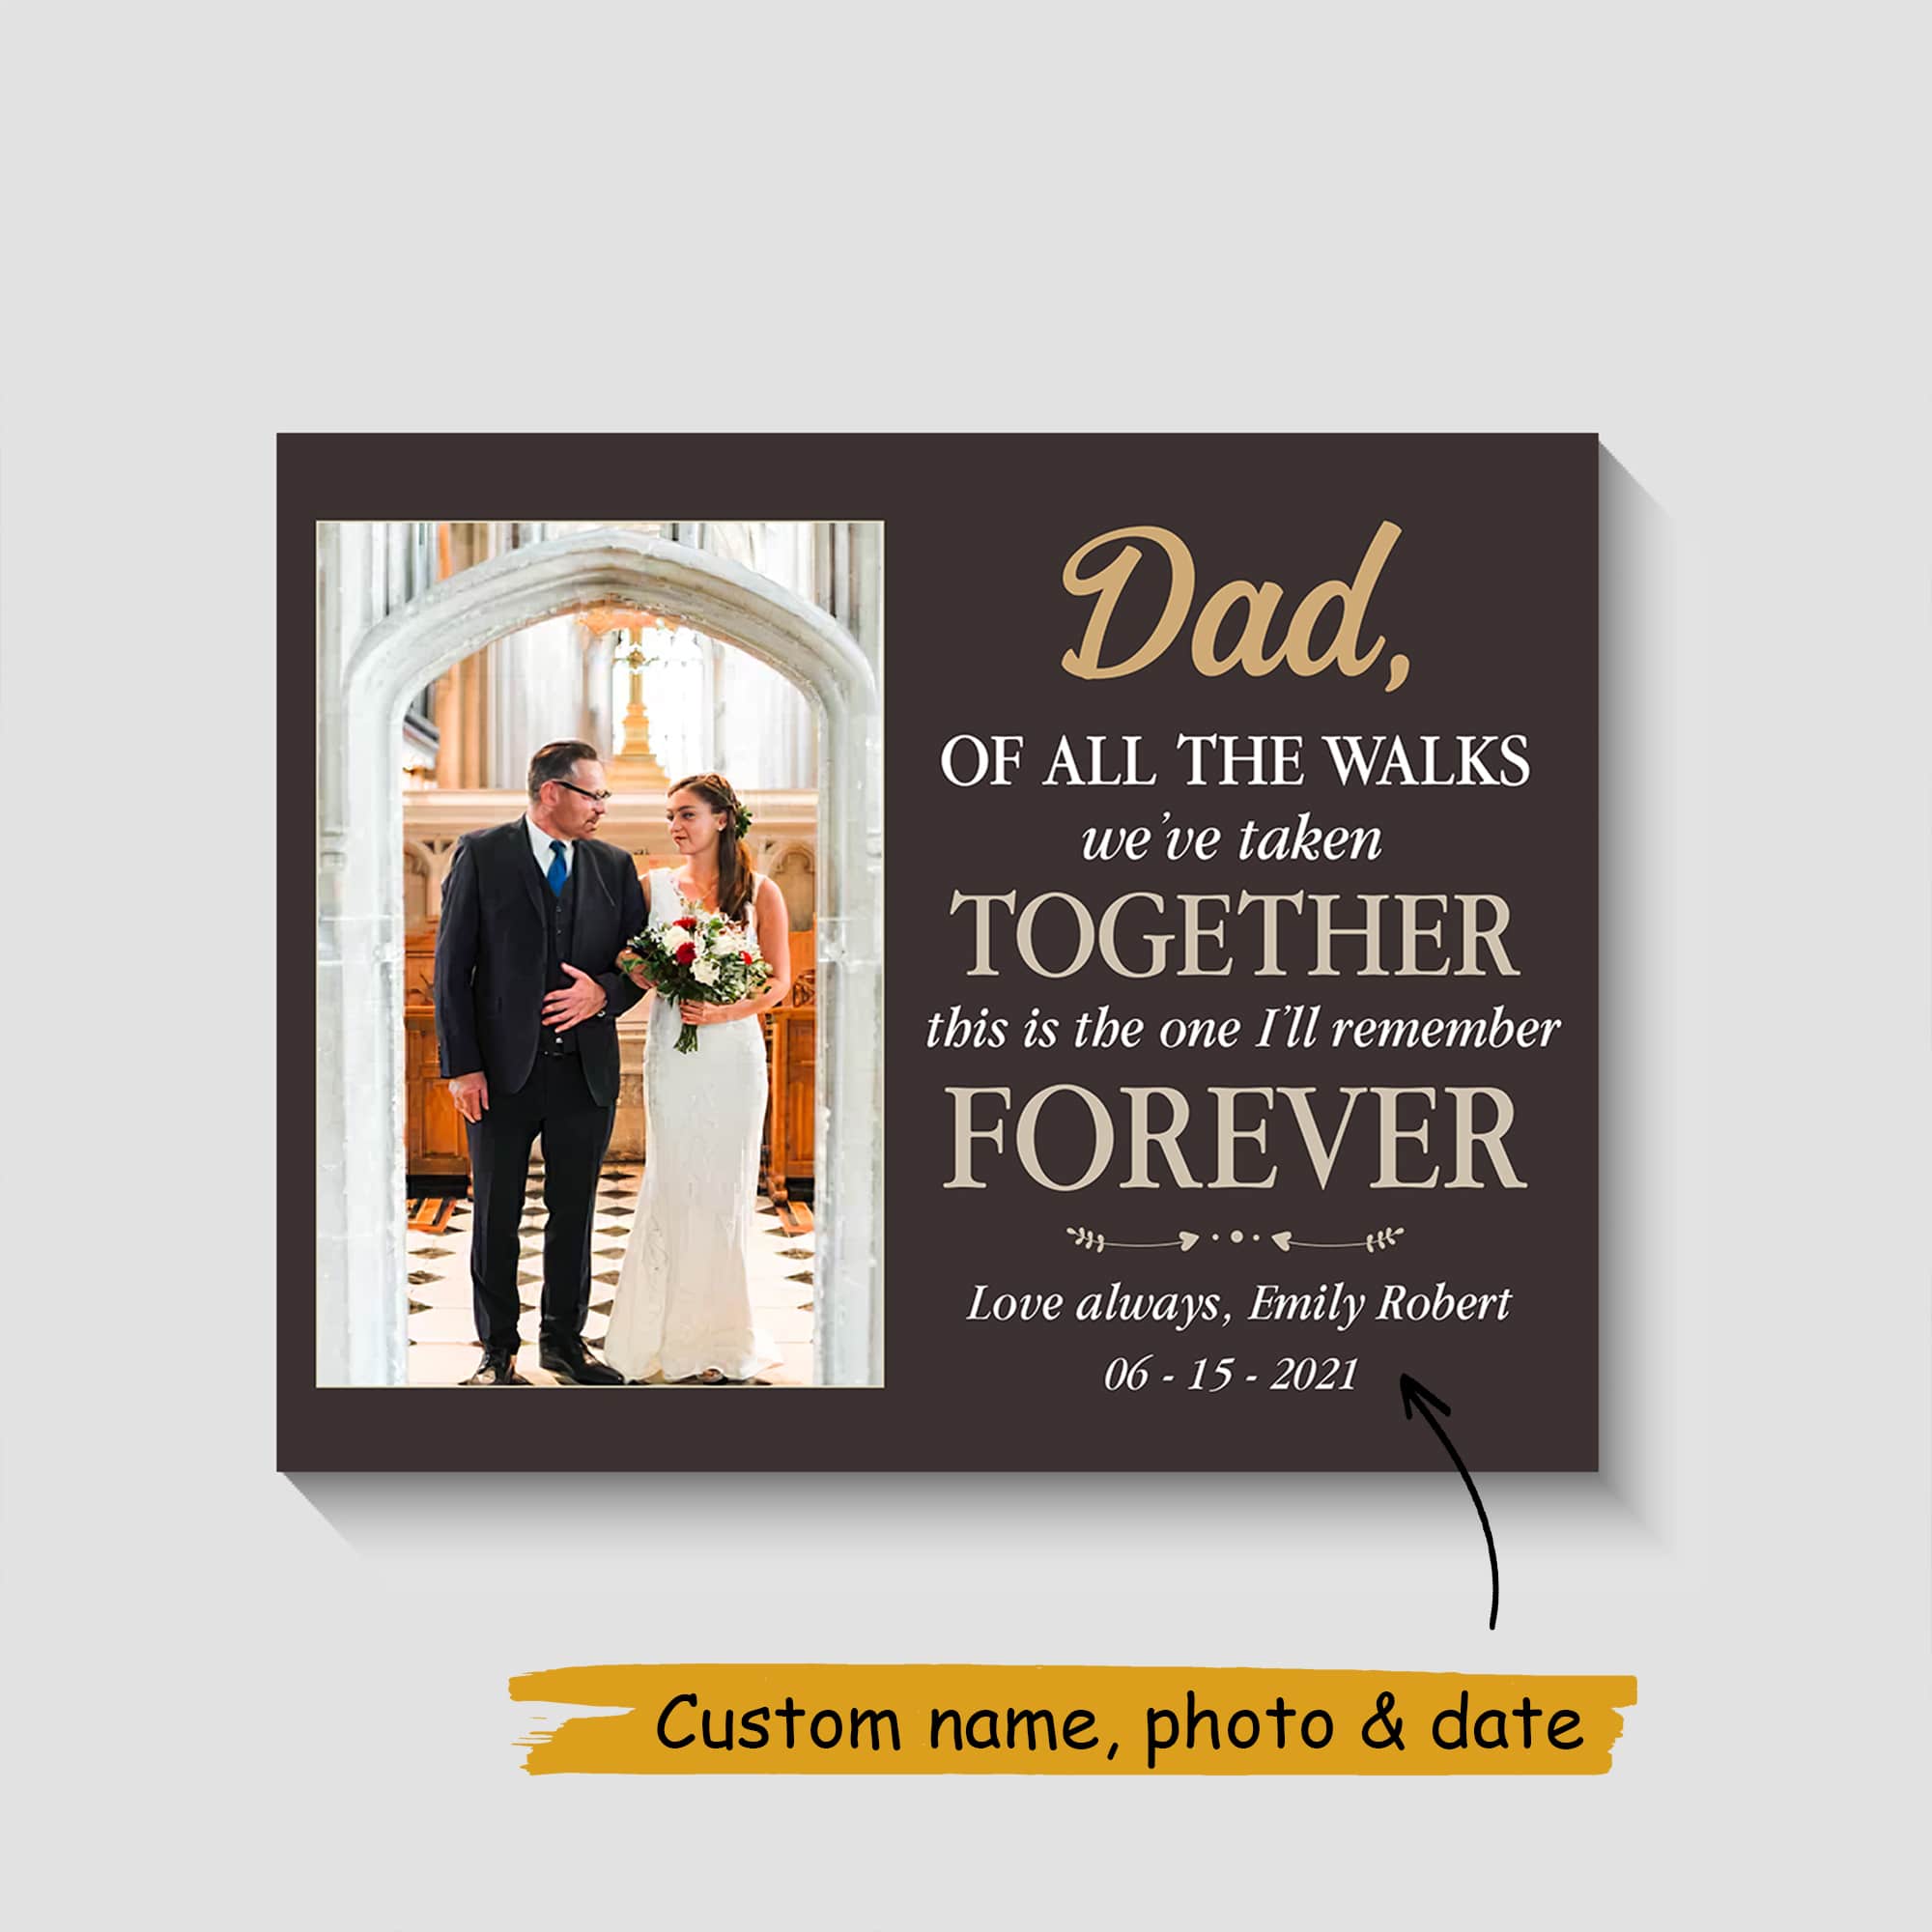 Custom Photo Personalized Father's Day Canvas for Dad